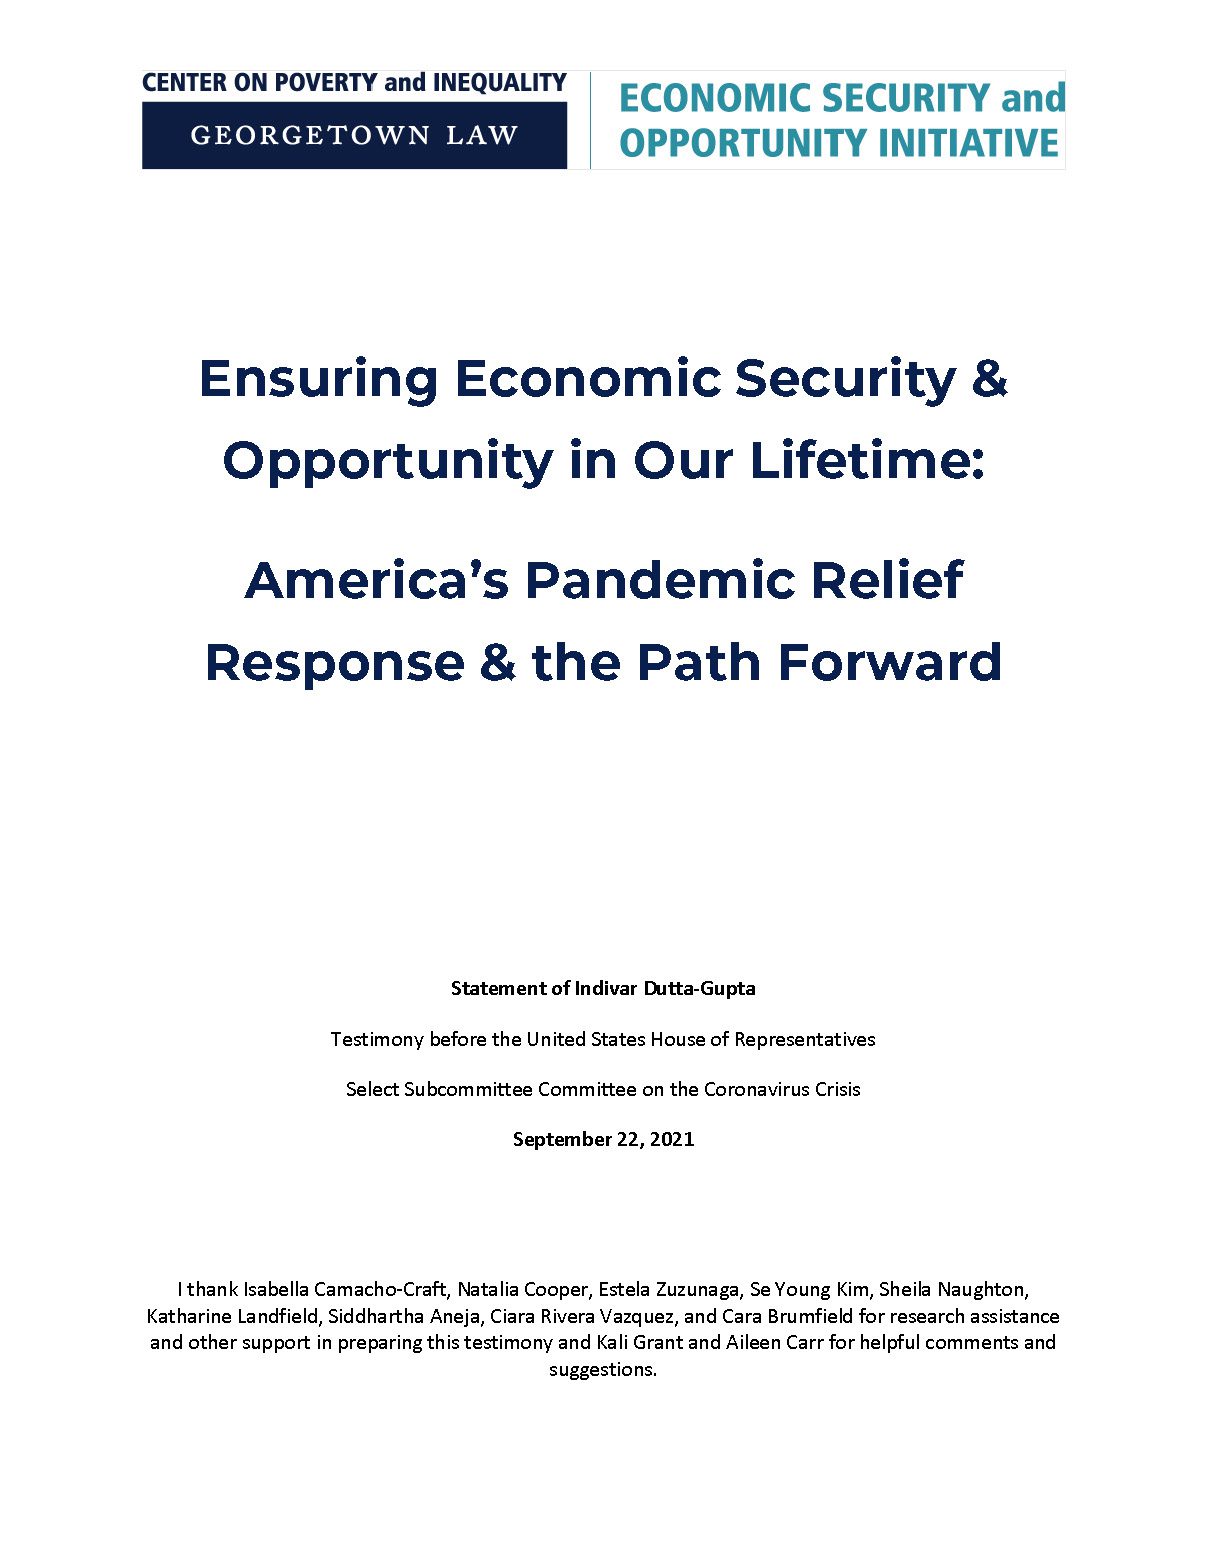 Ensuring Economic Security & Opportunity in Our Lifetime: America's Pandemic Relief Response & The Path Forward testimony cover